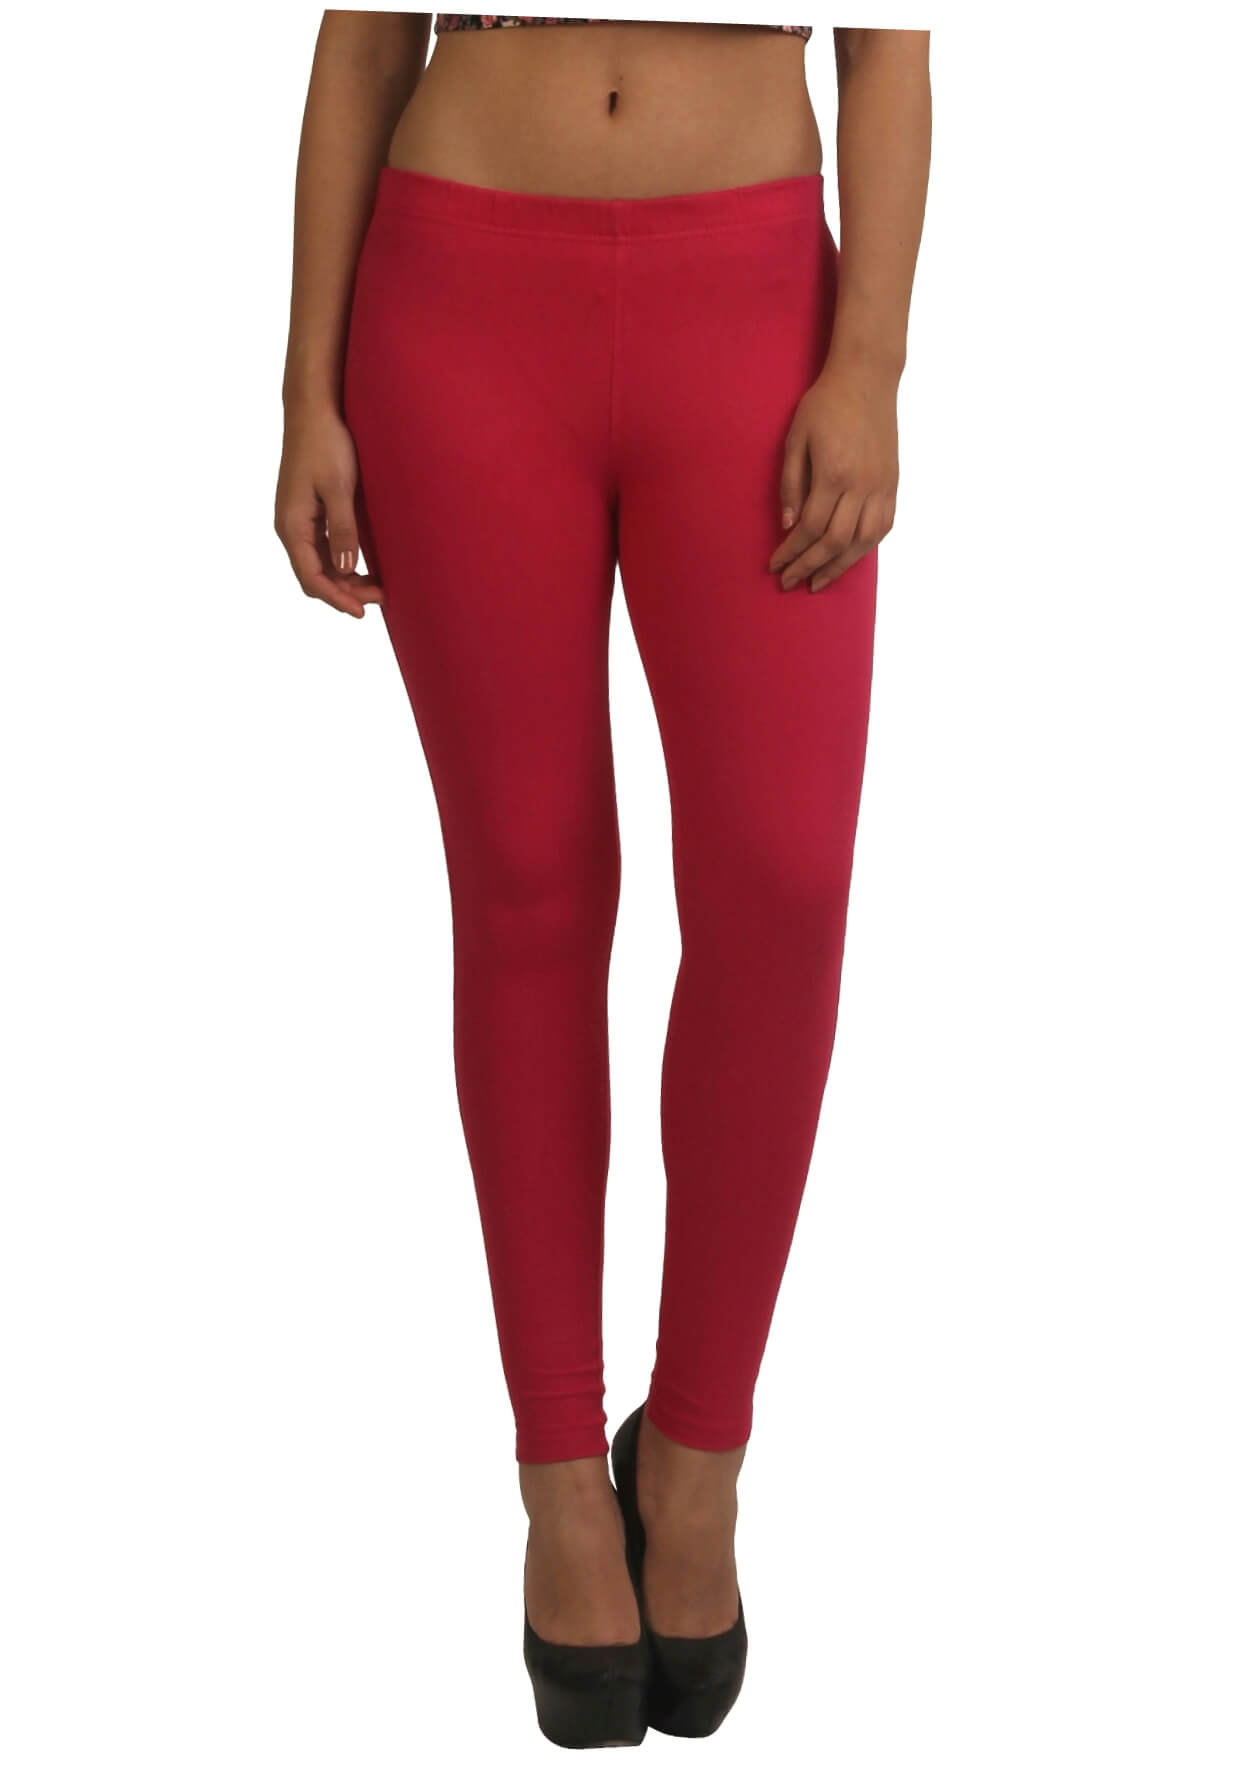 https://frenchtrendz.com/images/thumbs/0001093_frenchtrendz-cotton-modal-spandex-swe-pink-jeggings.jpeg